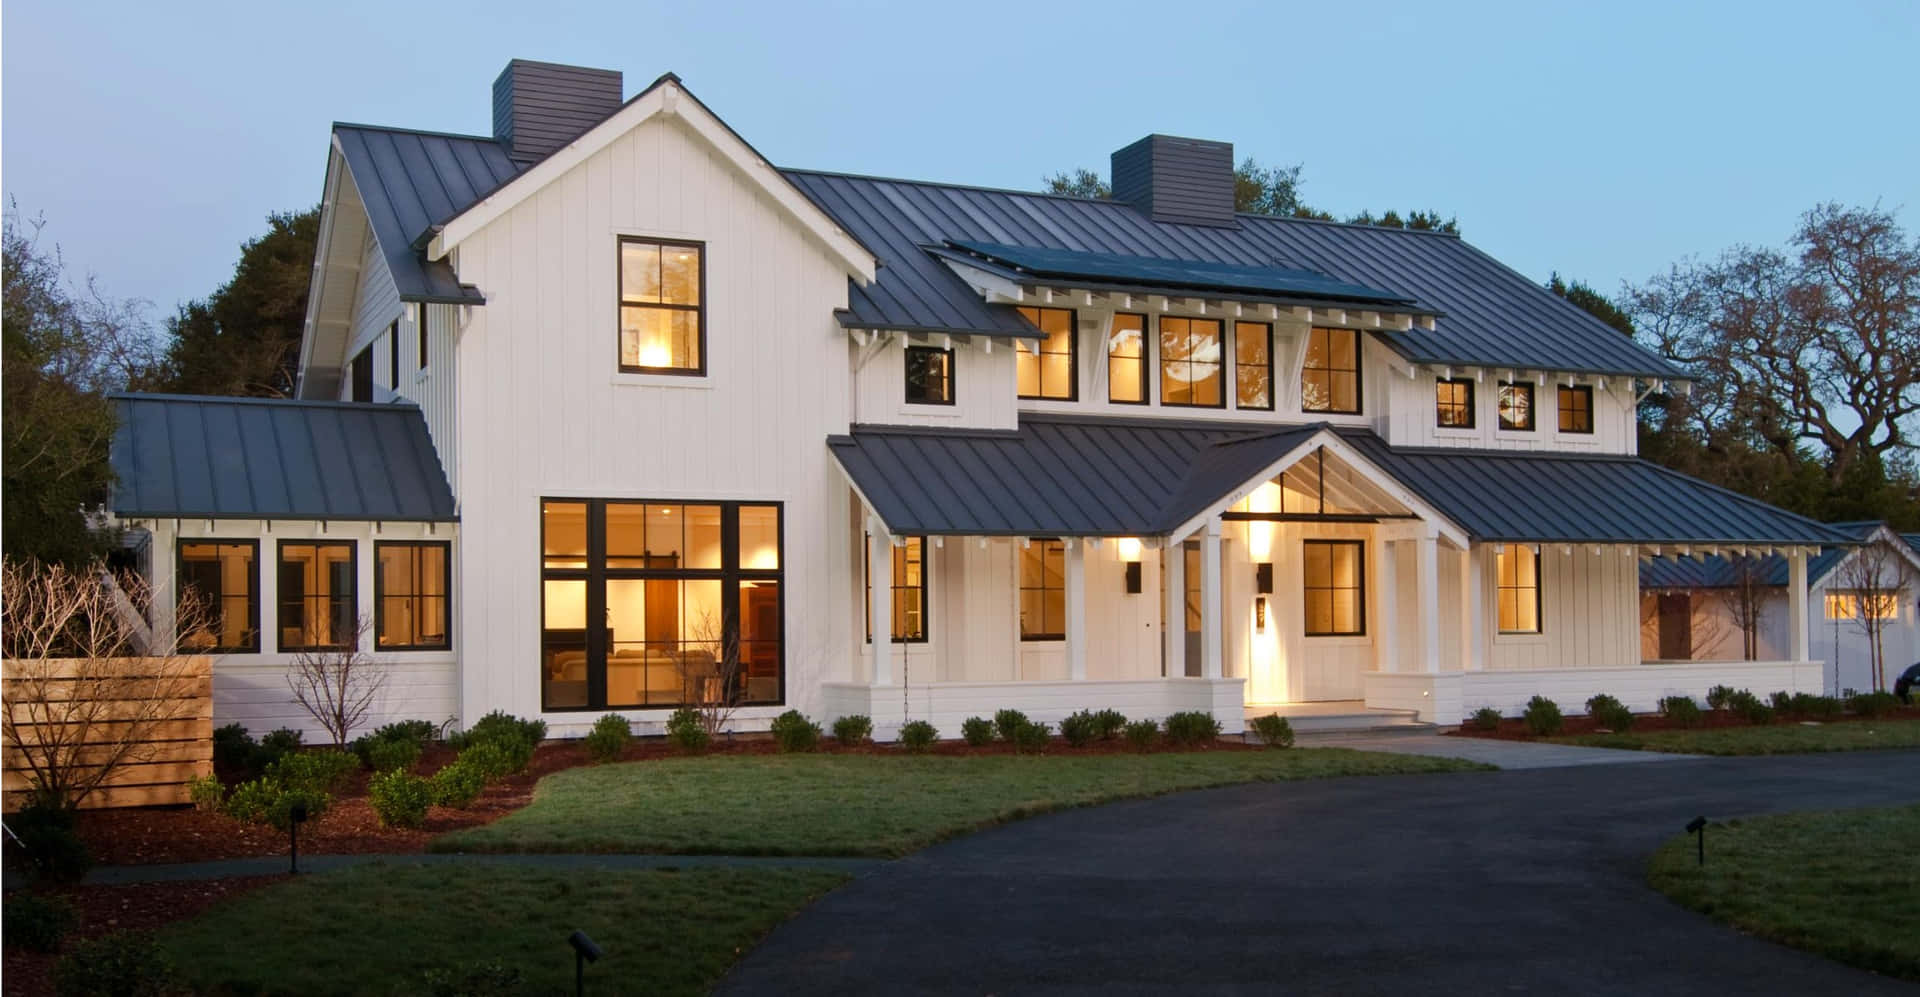 A White House With A Metal Roof And A Driveway